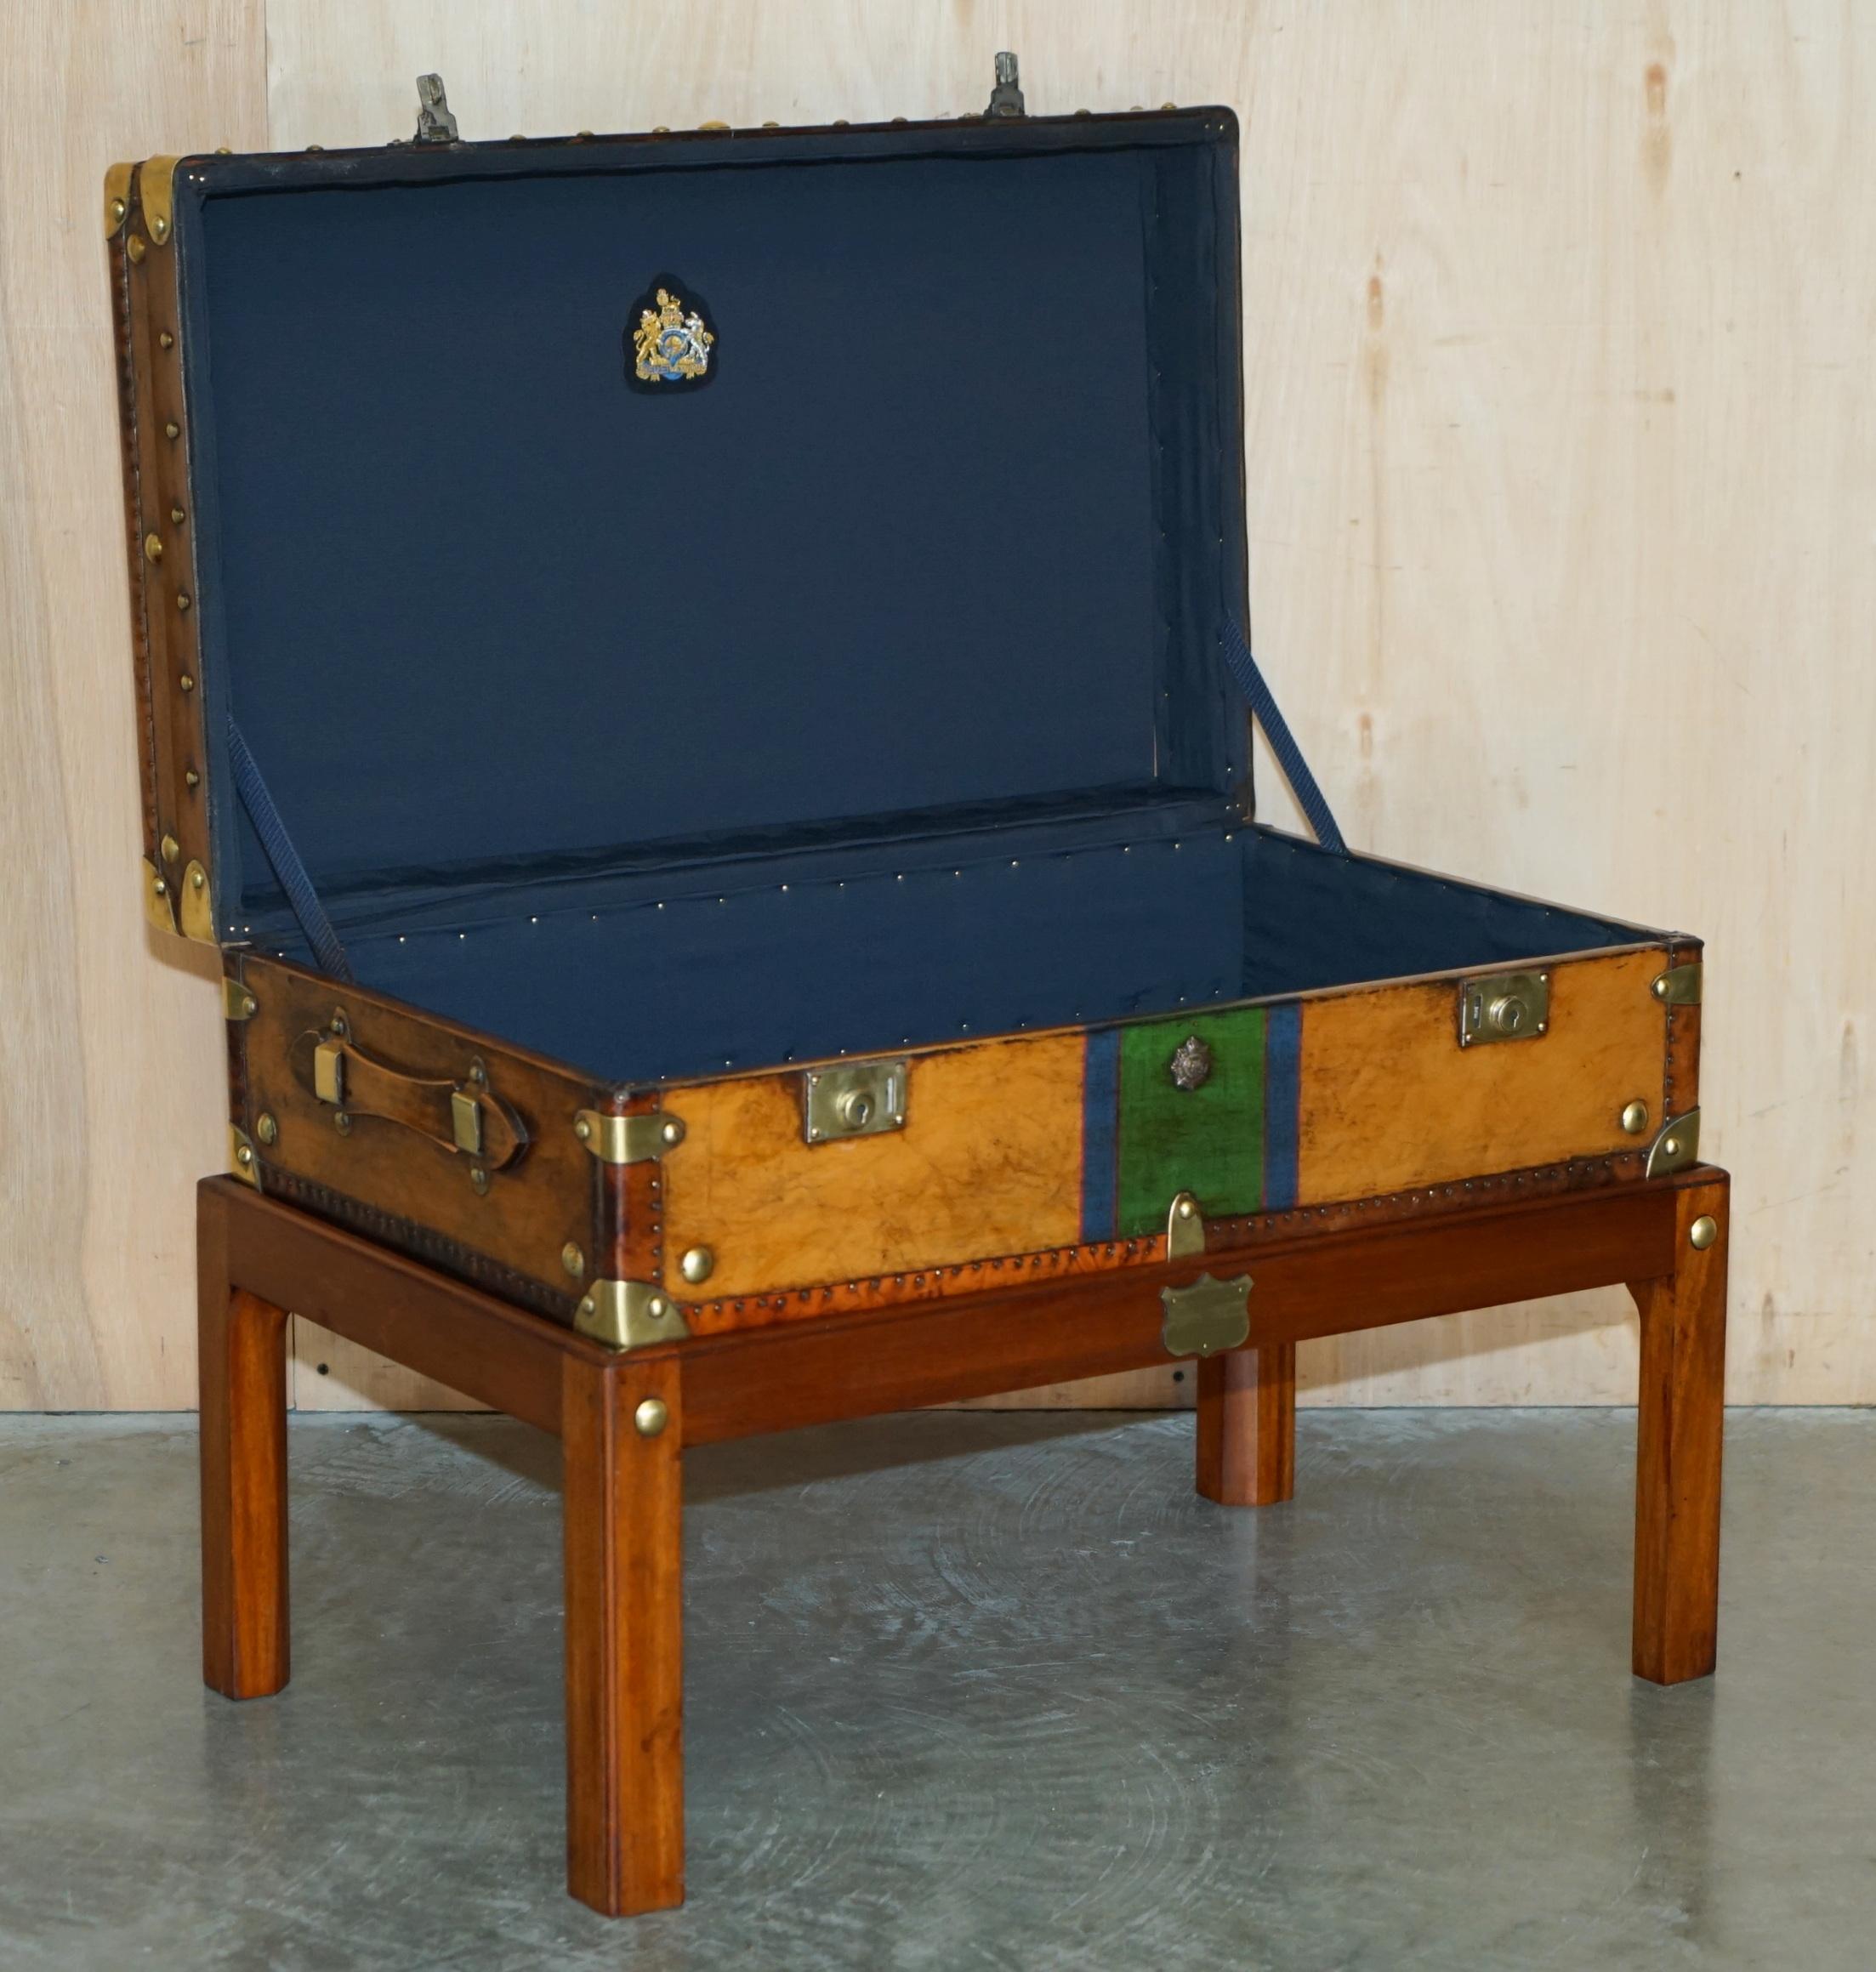 RESTORED BRITISH ARMY BROWN LEATHER TRUNK COFFEE TABLE HONI SOIT QUI MAL Y PENSe For Sale 12